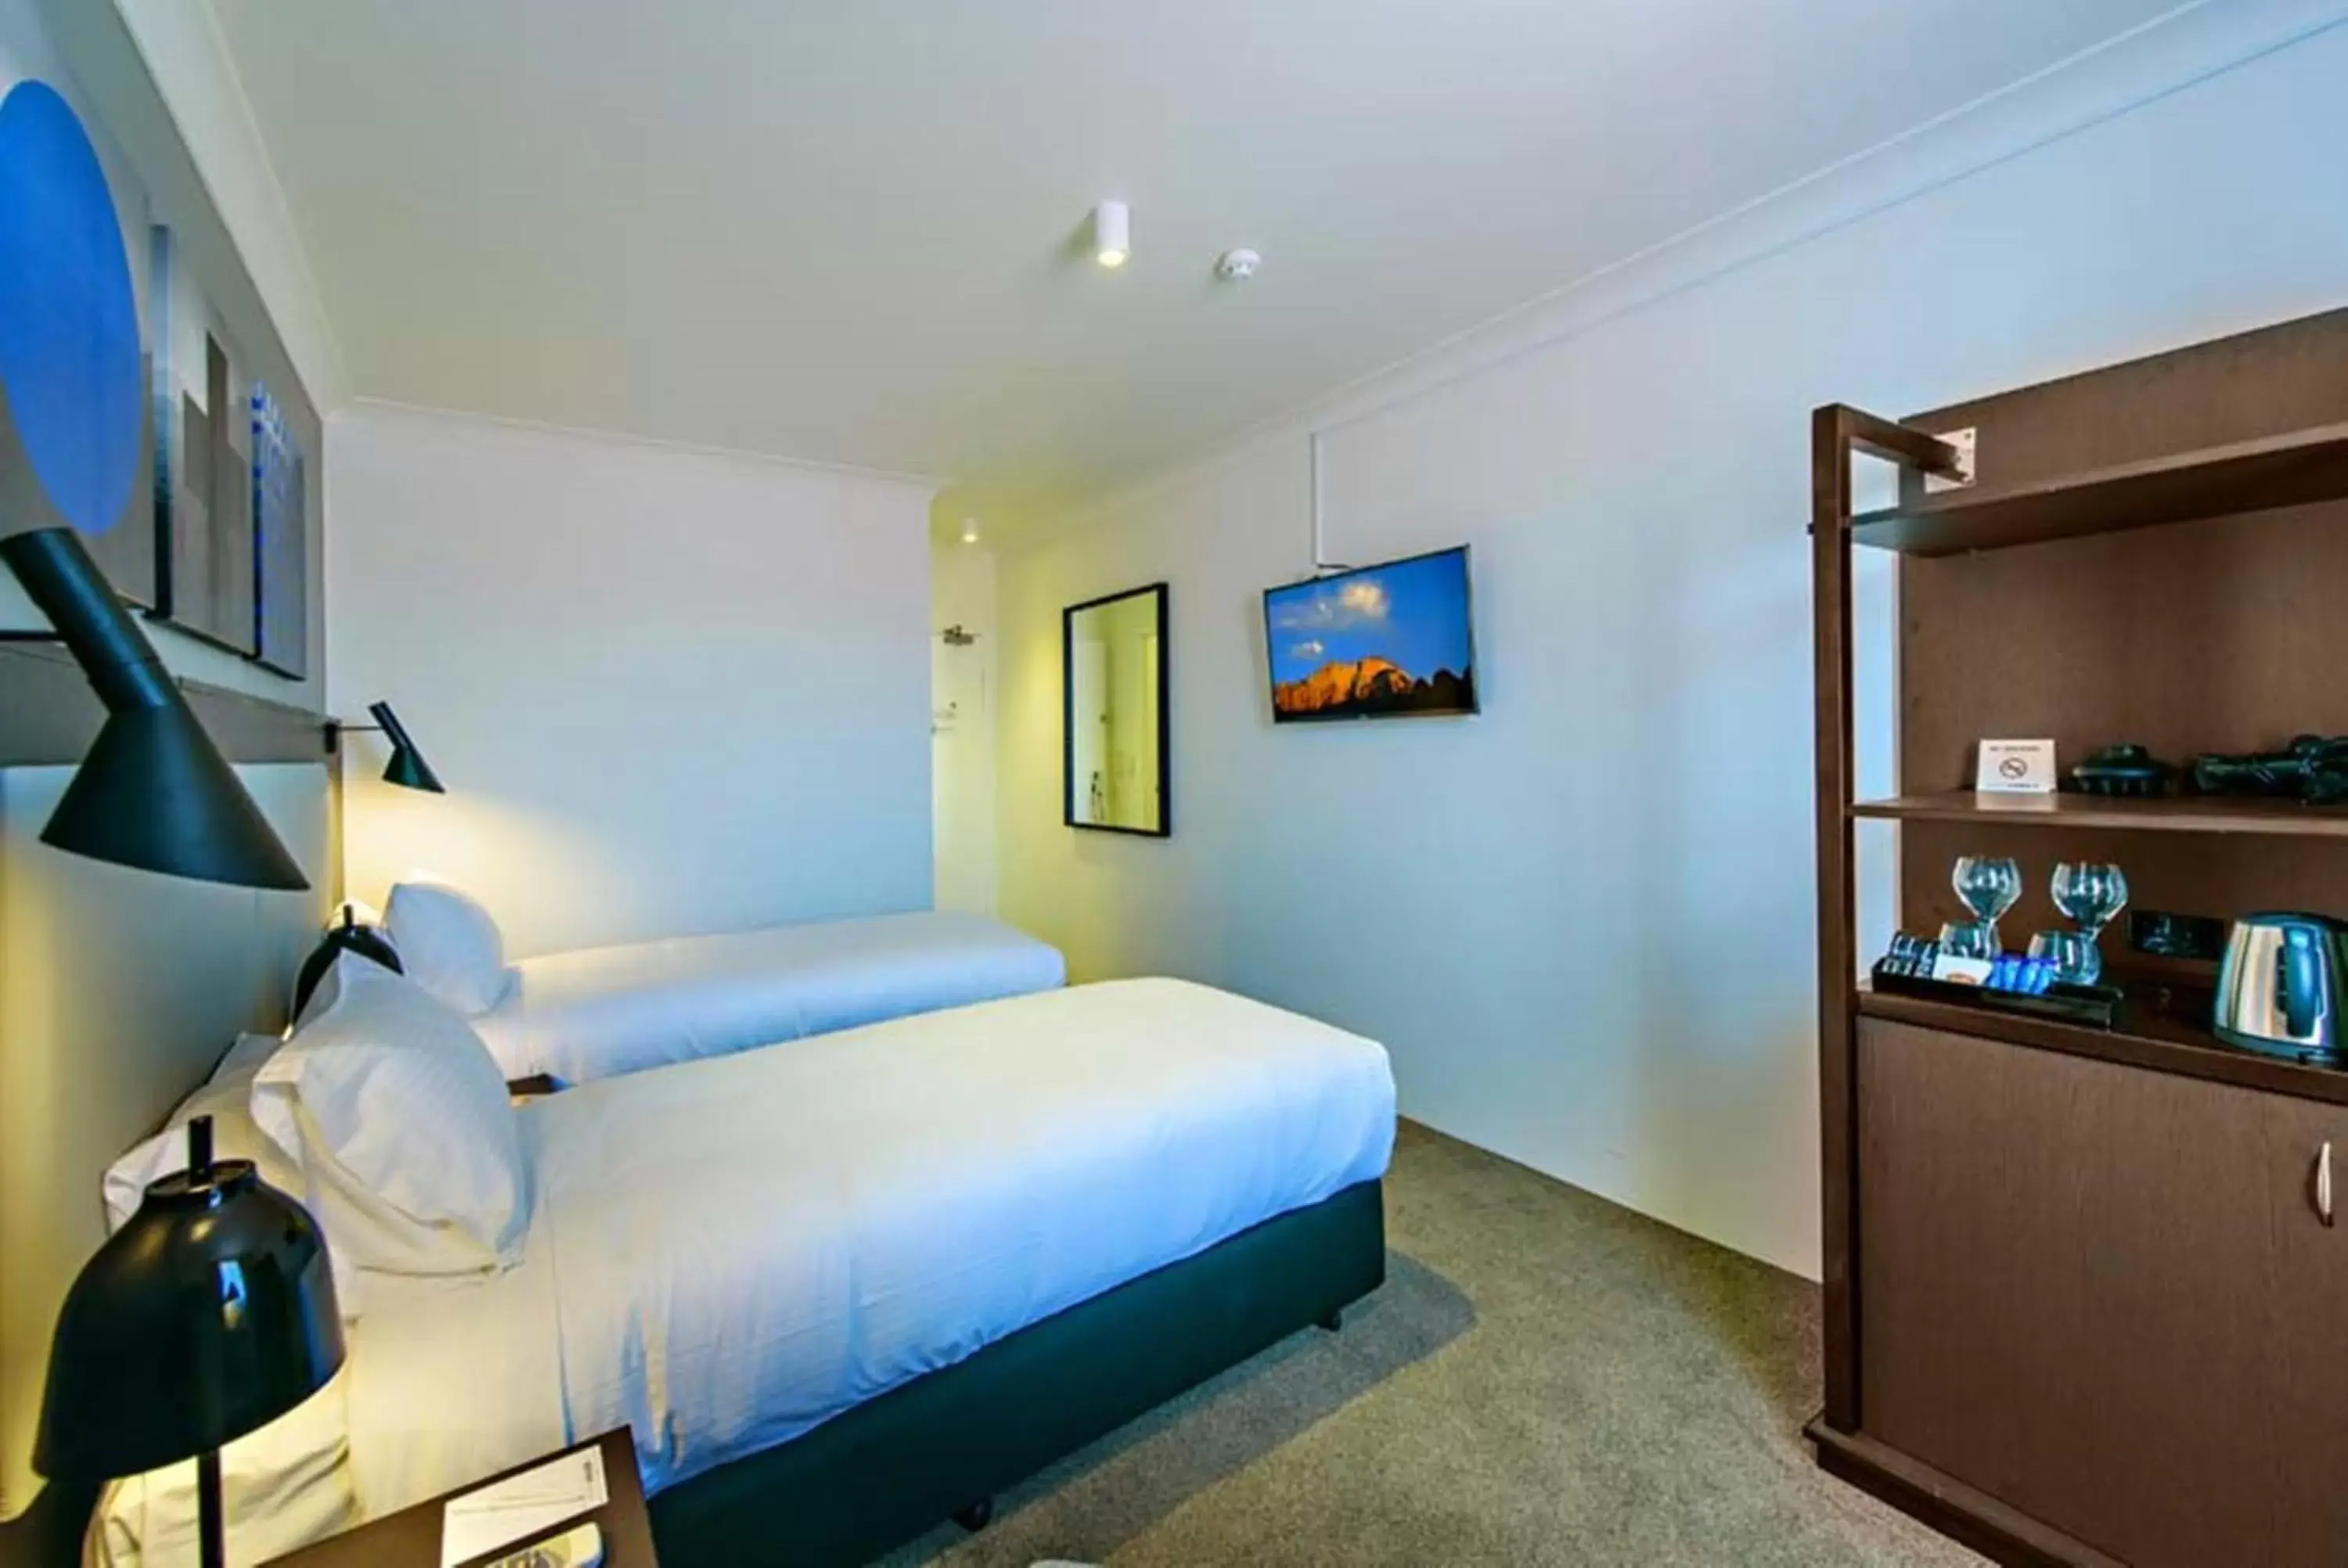 Bed, Room Photo in CKS Sydney Airport Hotel